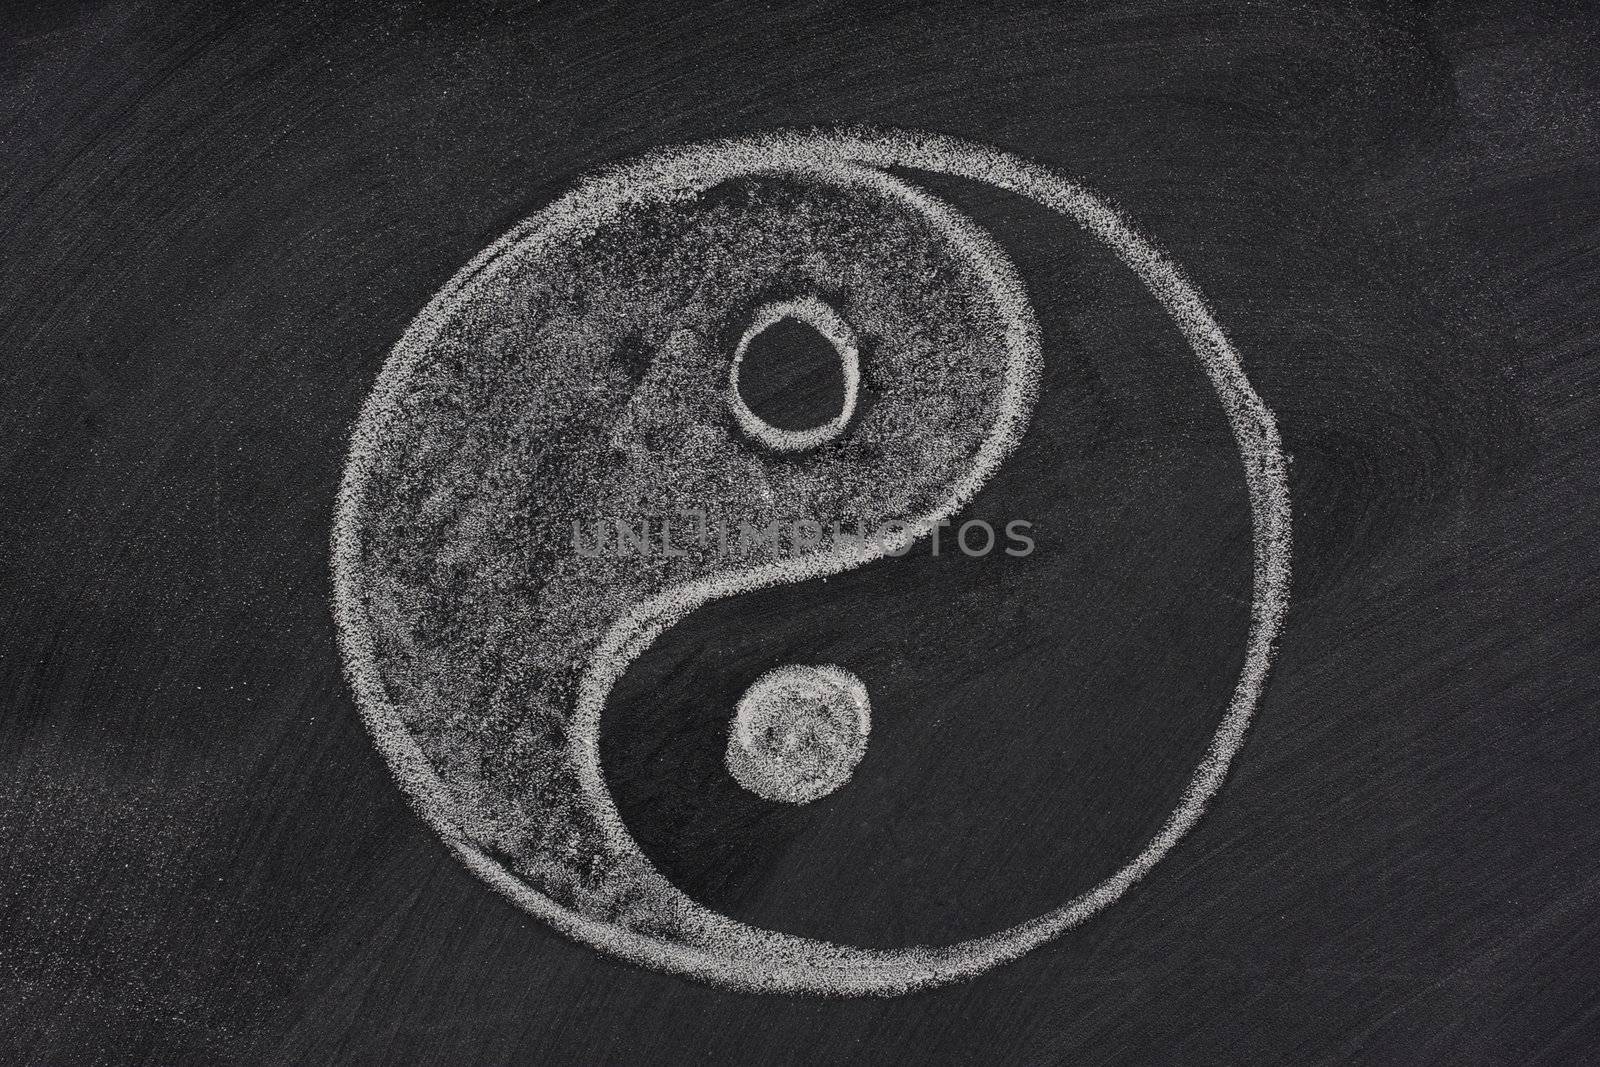 yin and yang symbol sketched with white chalk on a blackboard with eraser smudges